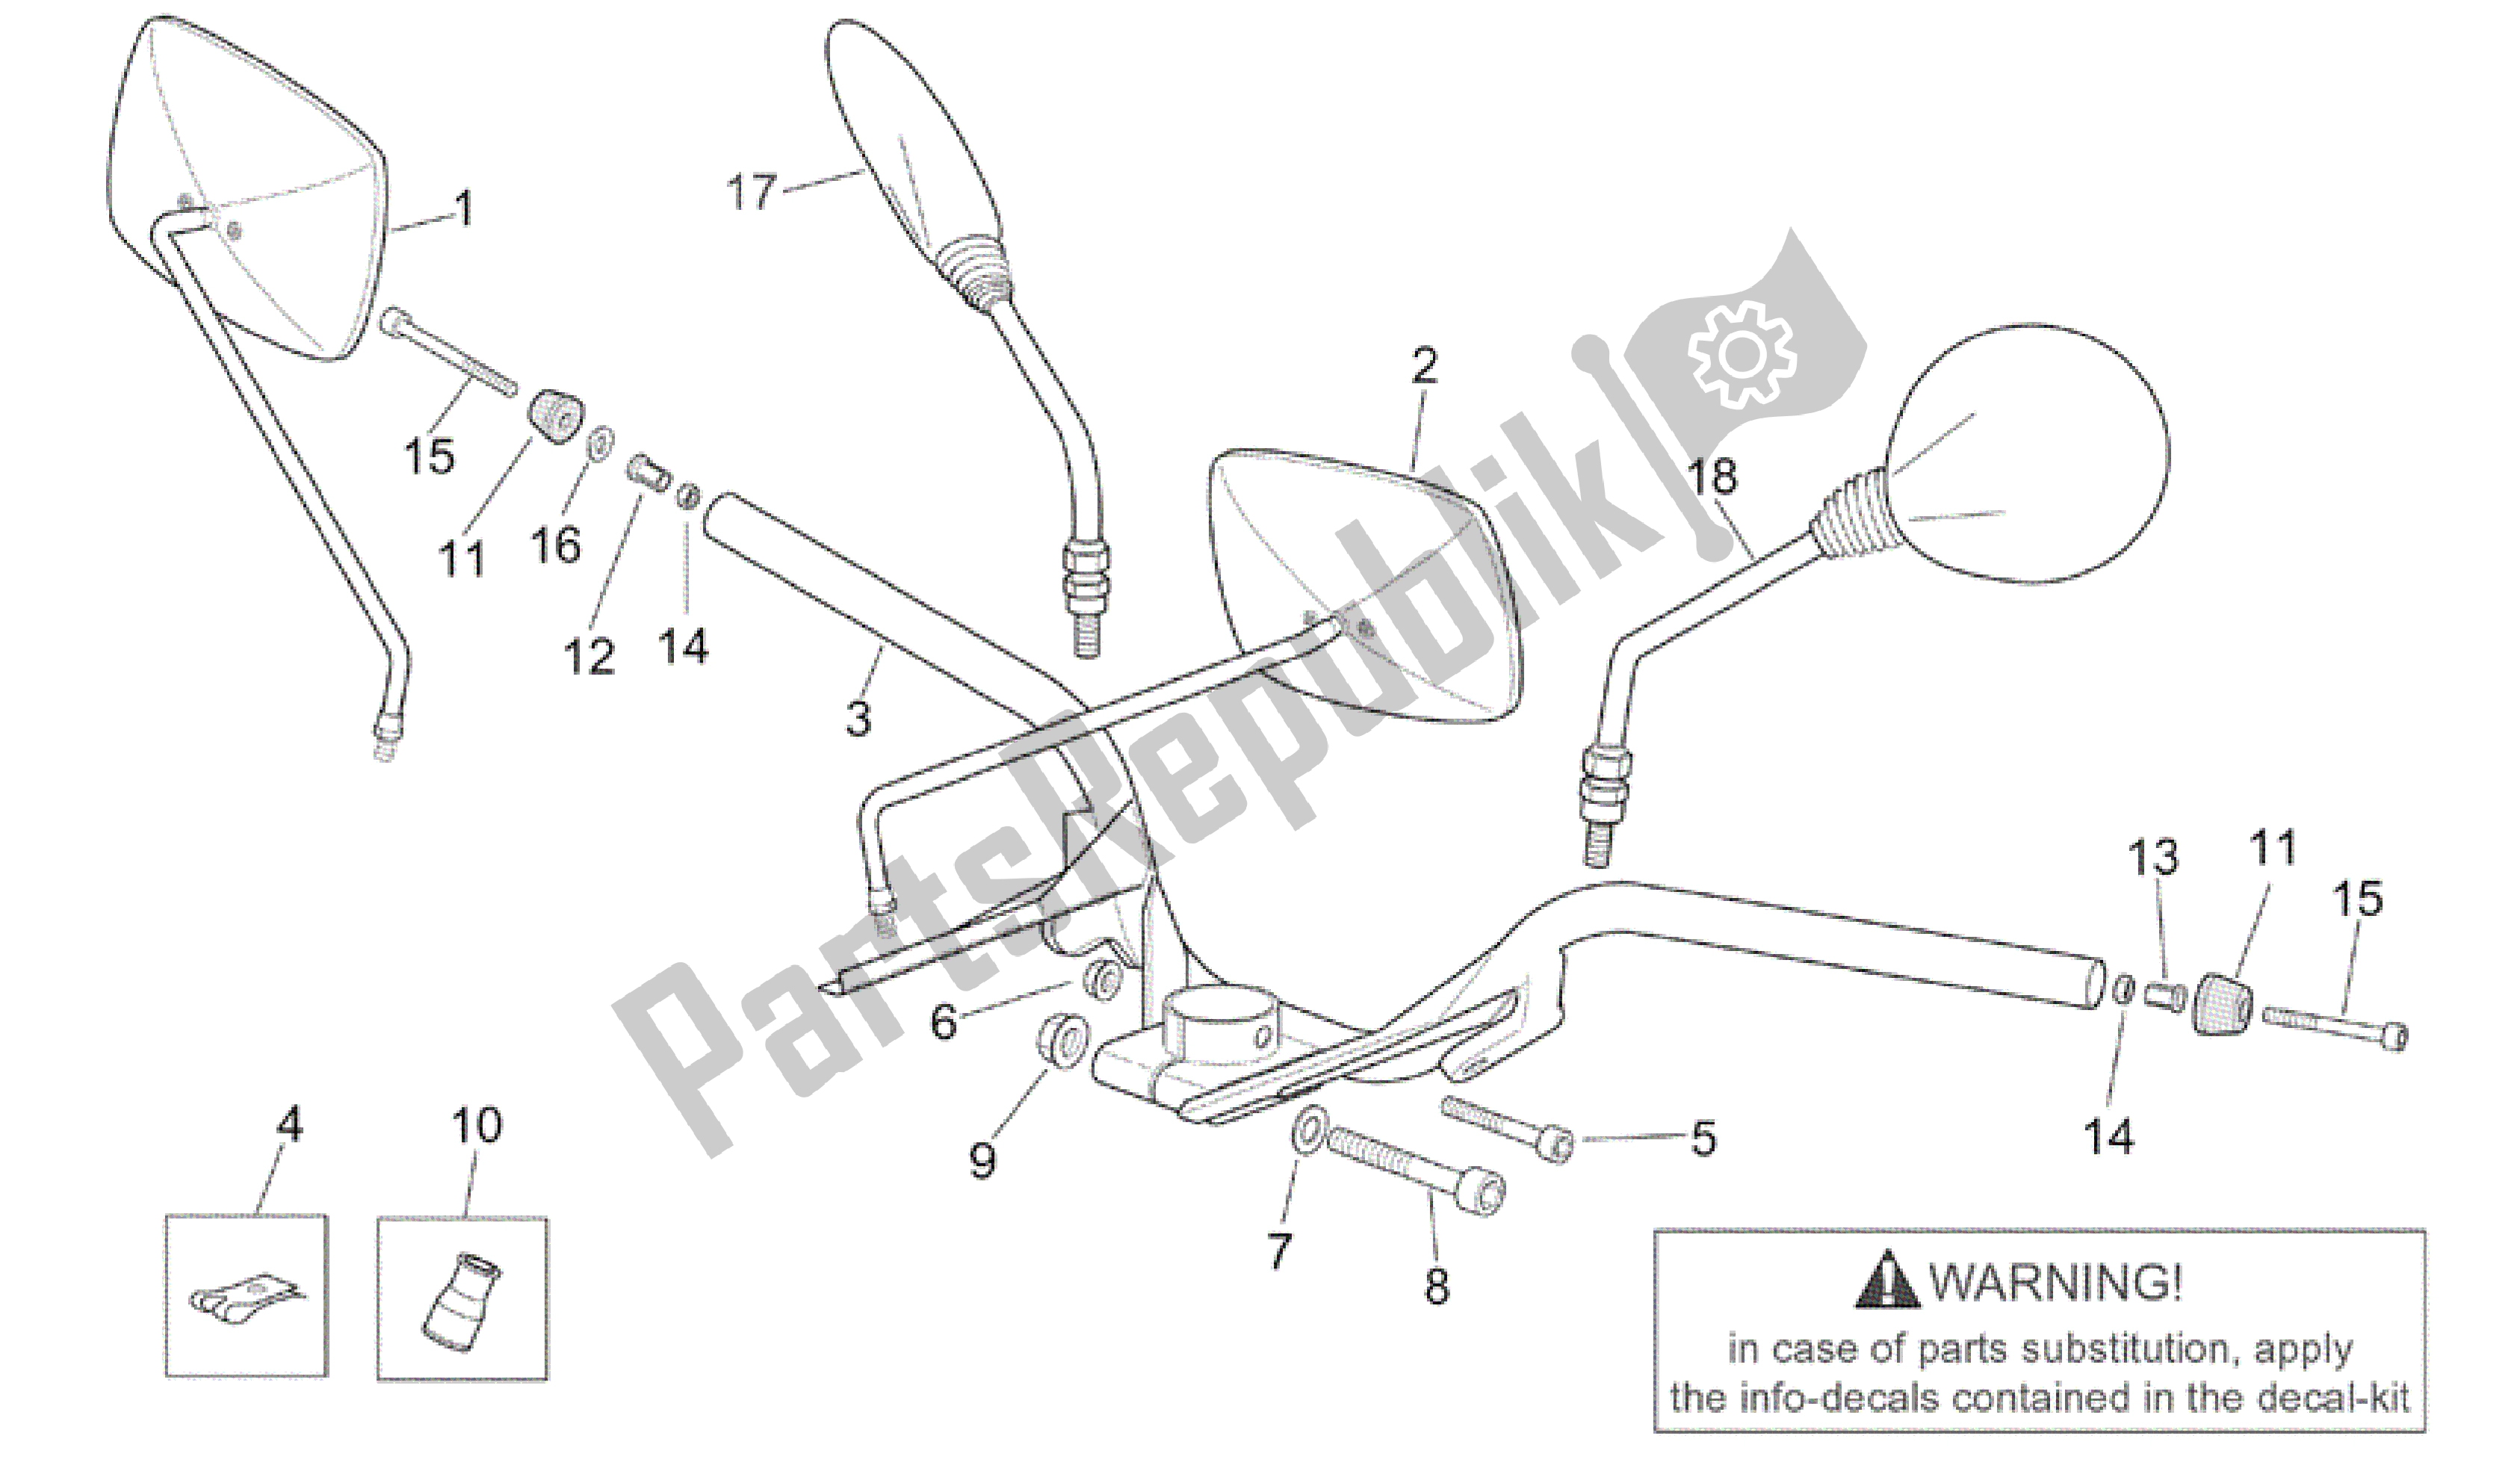 All parts for the Handlebar of the Aprilia Scarabeo 200 1999 - 2004